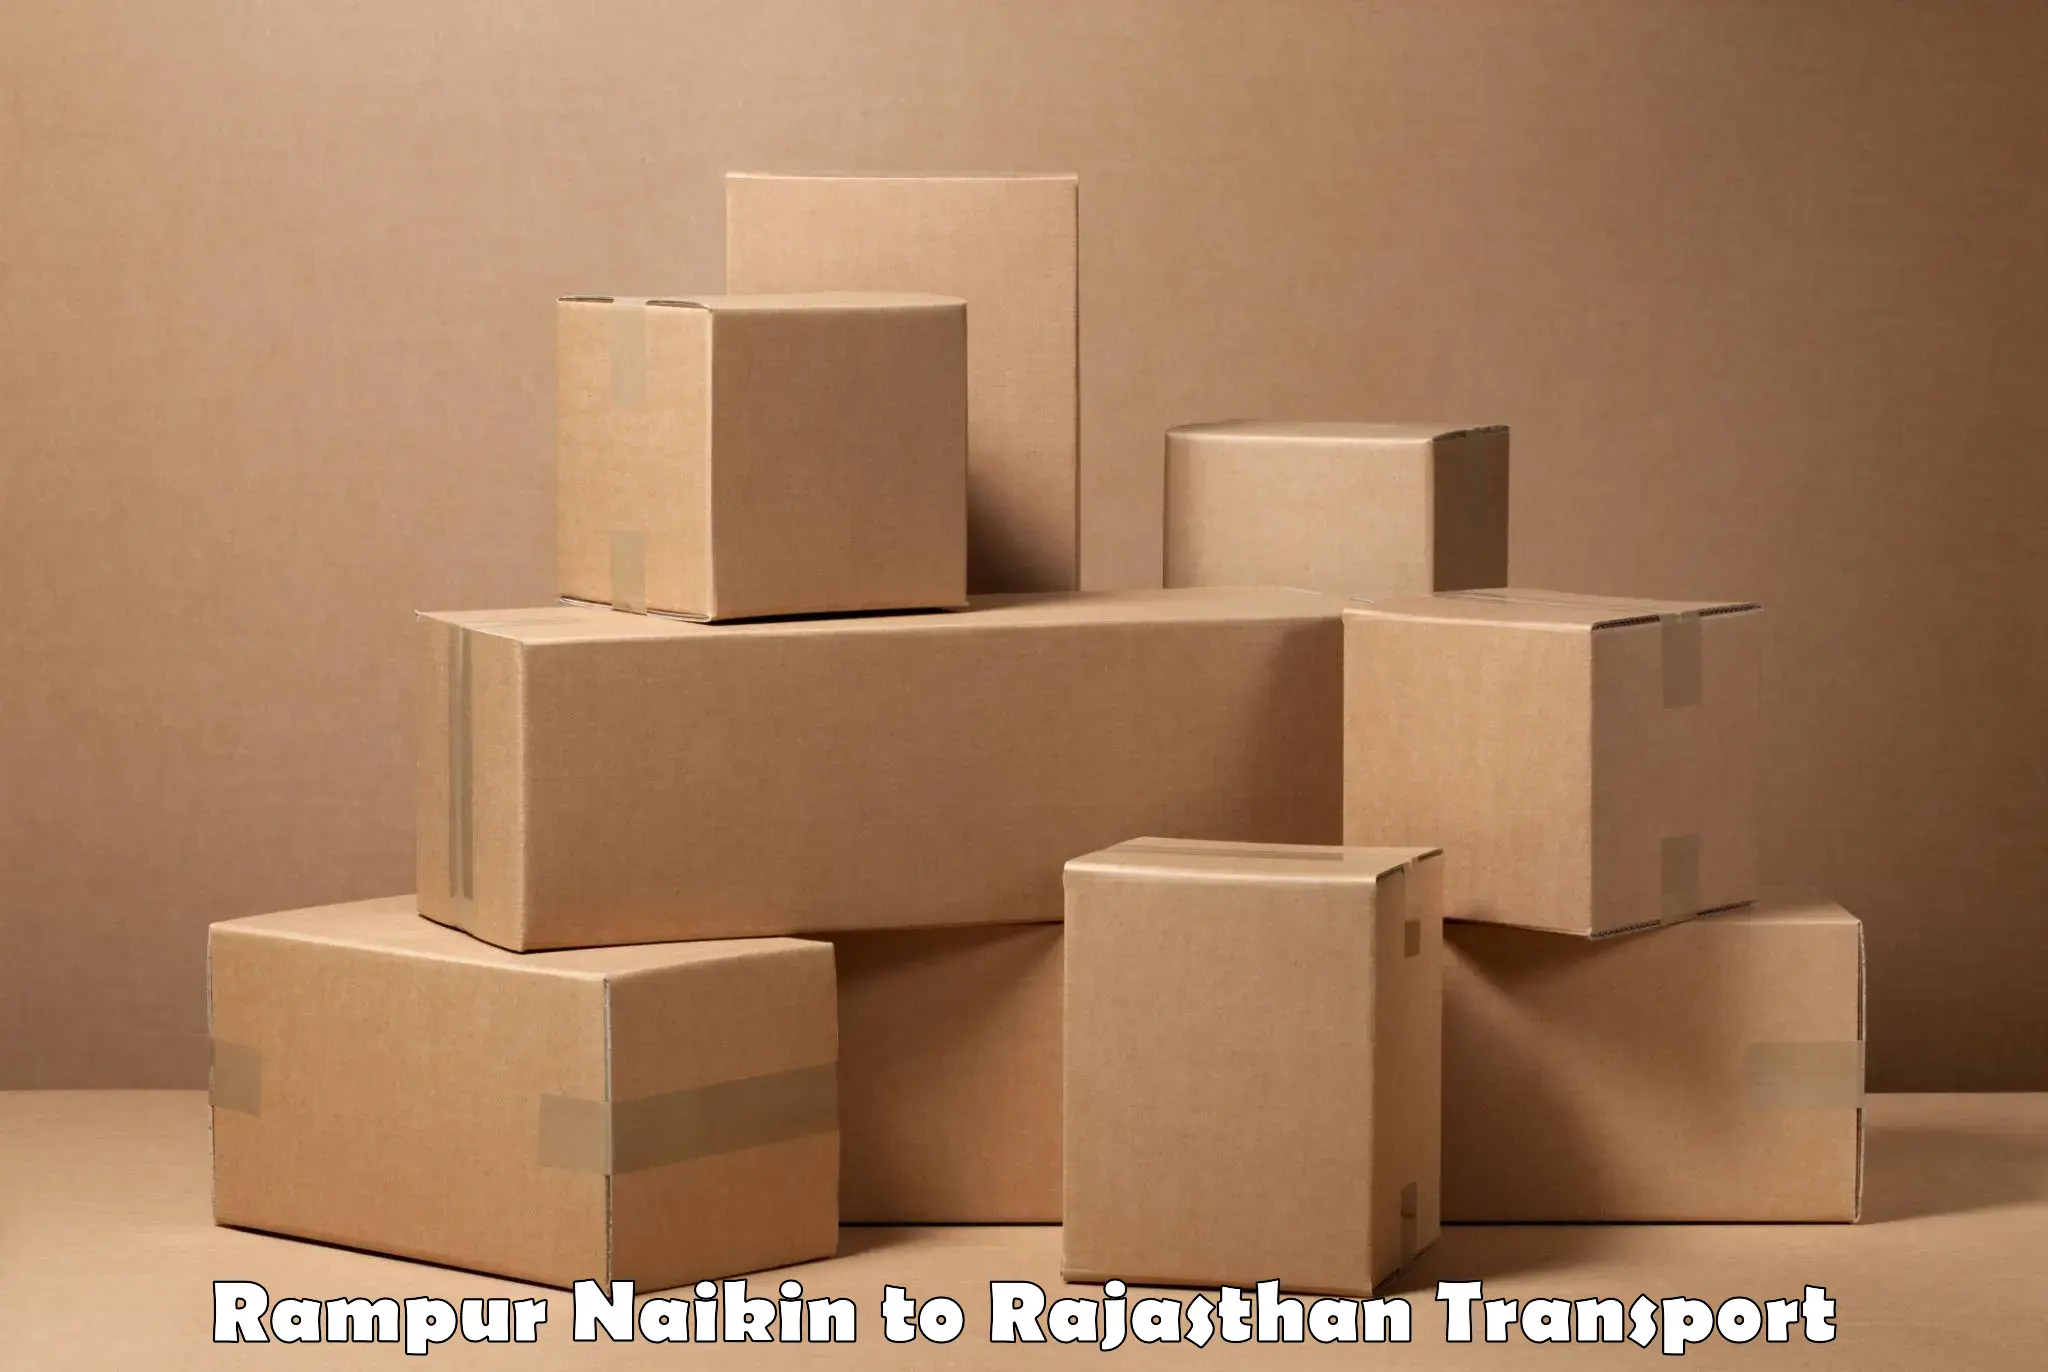 Air freight transport services Rampur Naikin to Piparcity